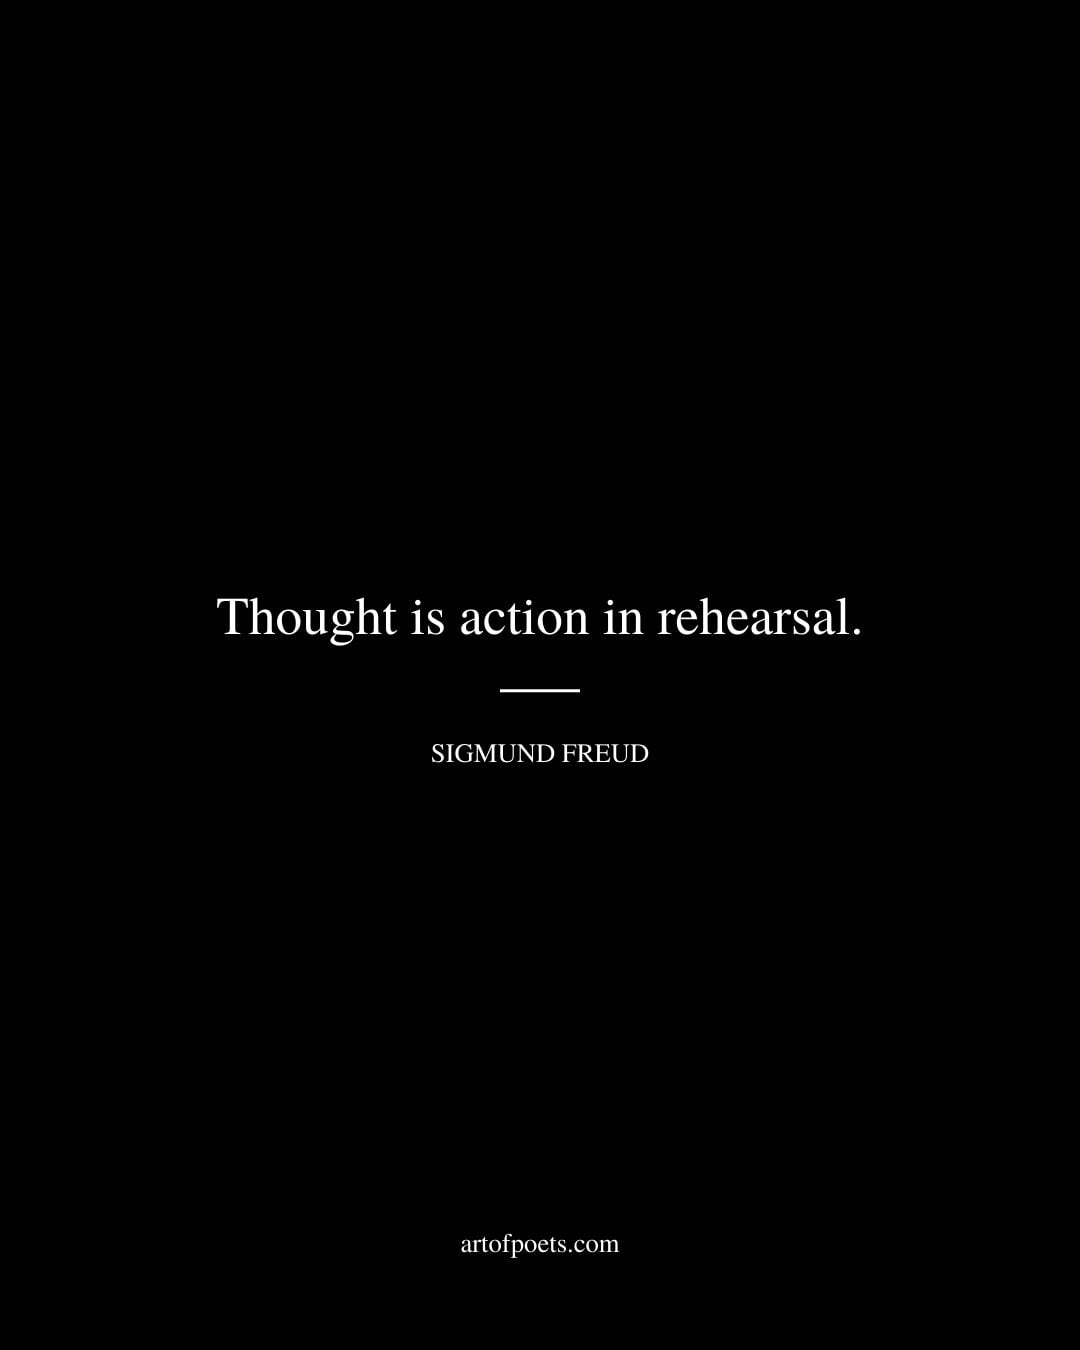 Thought is action in rehearsal